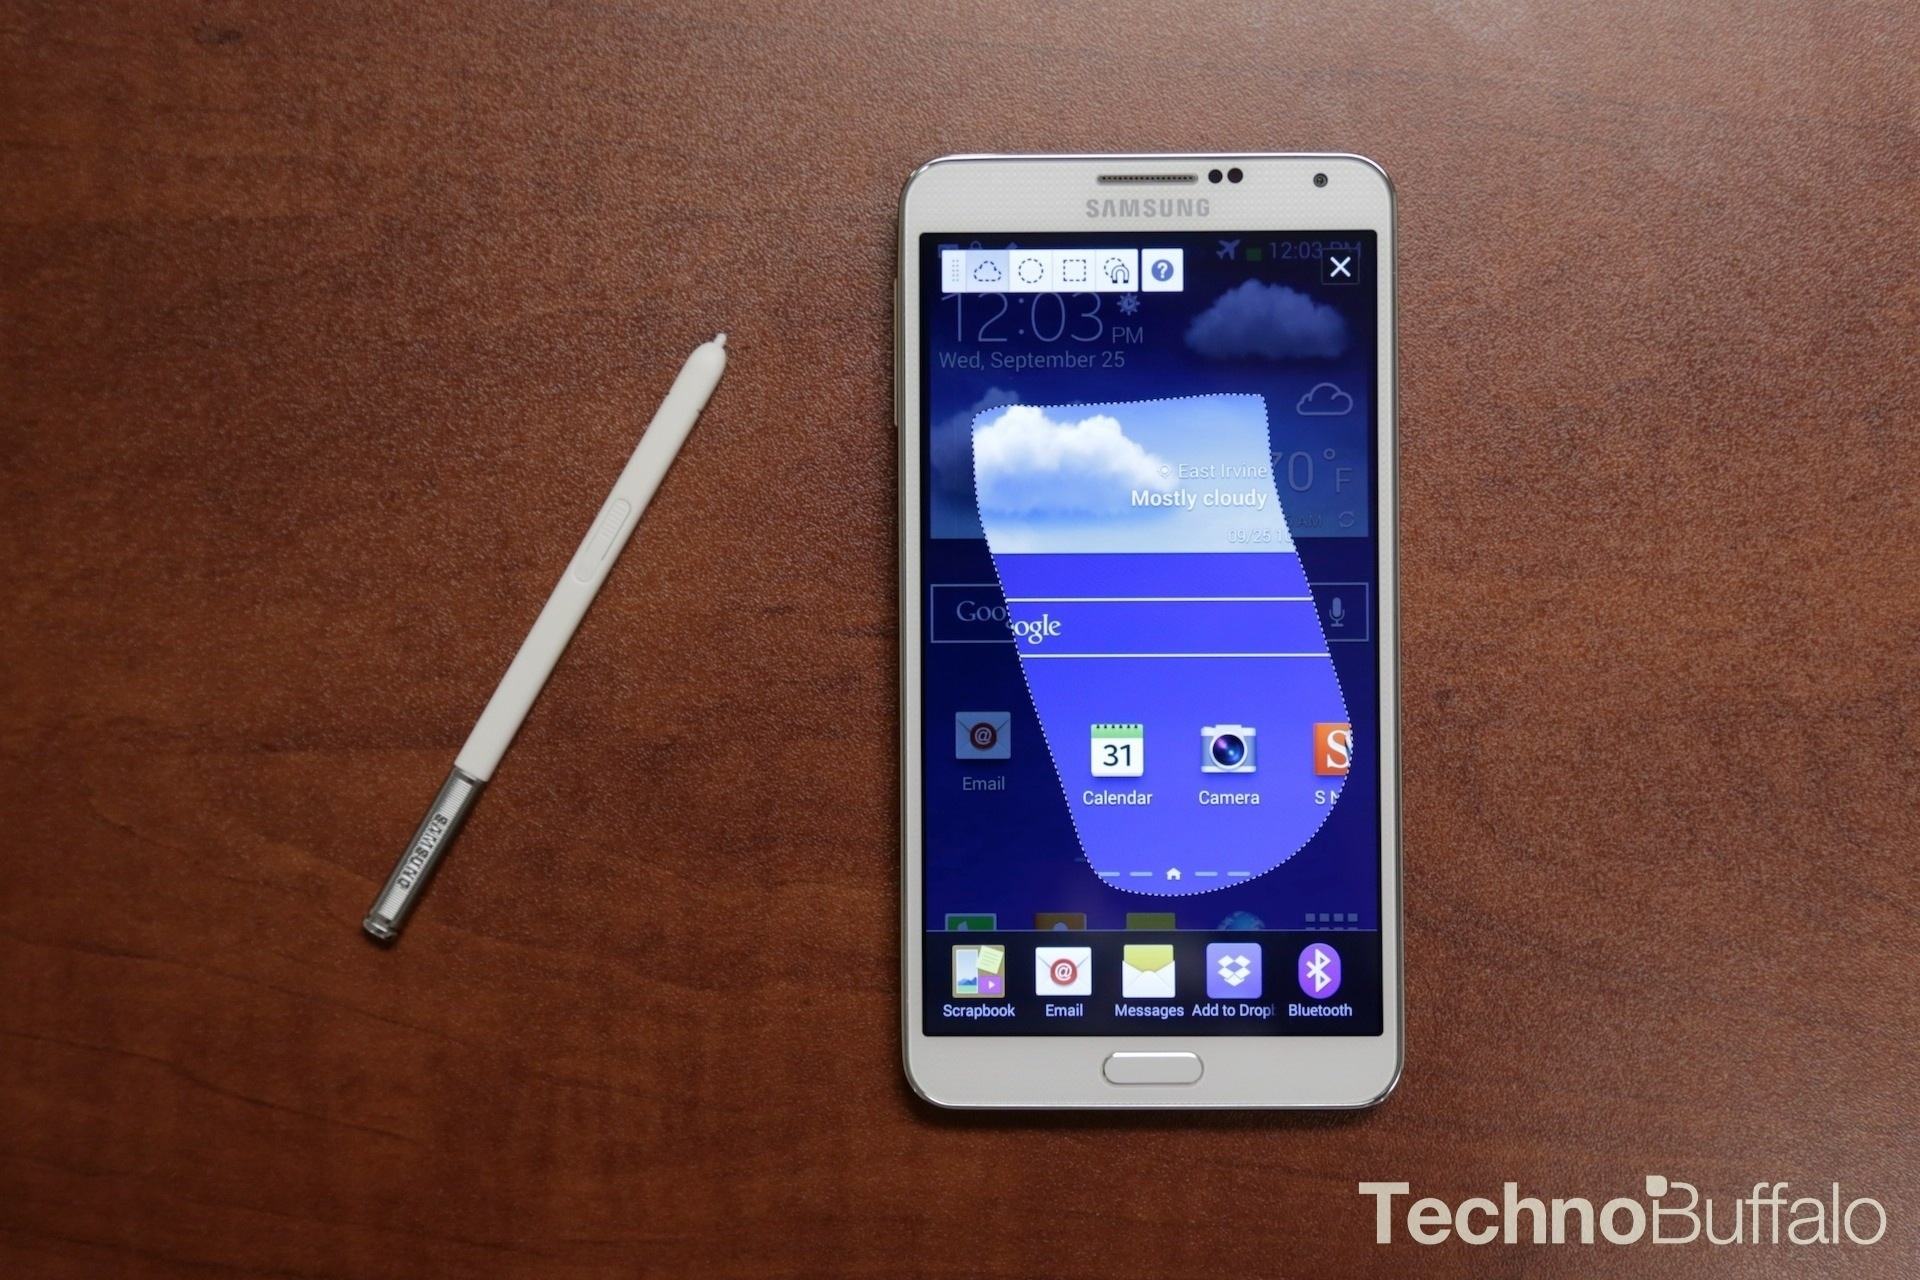 Samsung Allegedly Prepping Cheaper Galaxy Note 3 For Early 2014 Debut Samsung Galaxy Note 3 Calendar Holidays